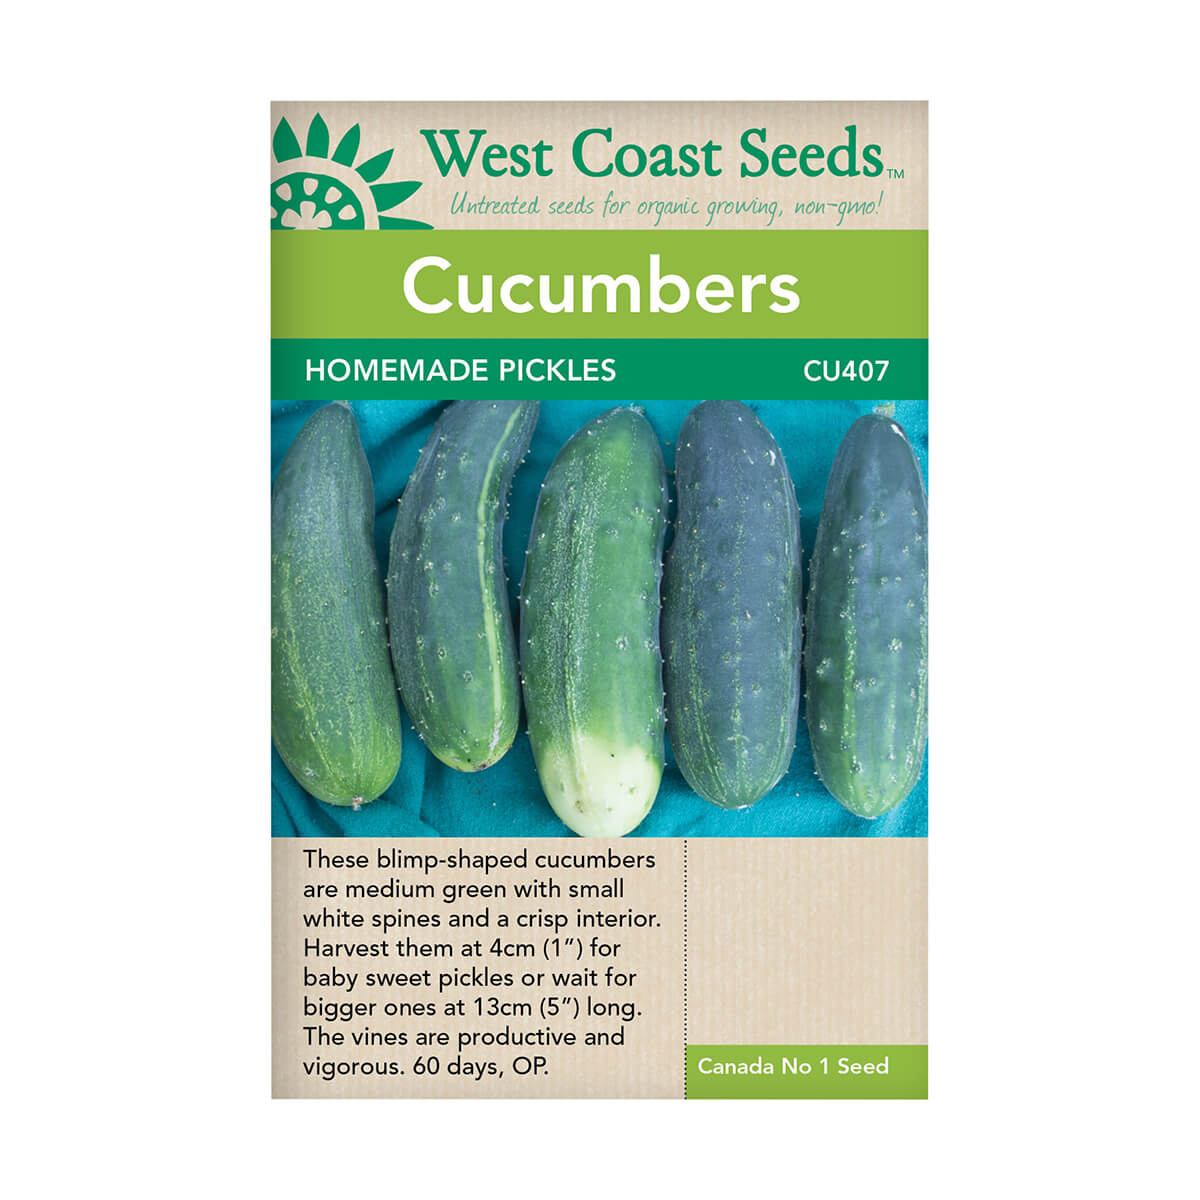 Homemade Pickles Cucumber Seeds - approx. 20 seeds